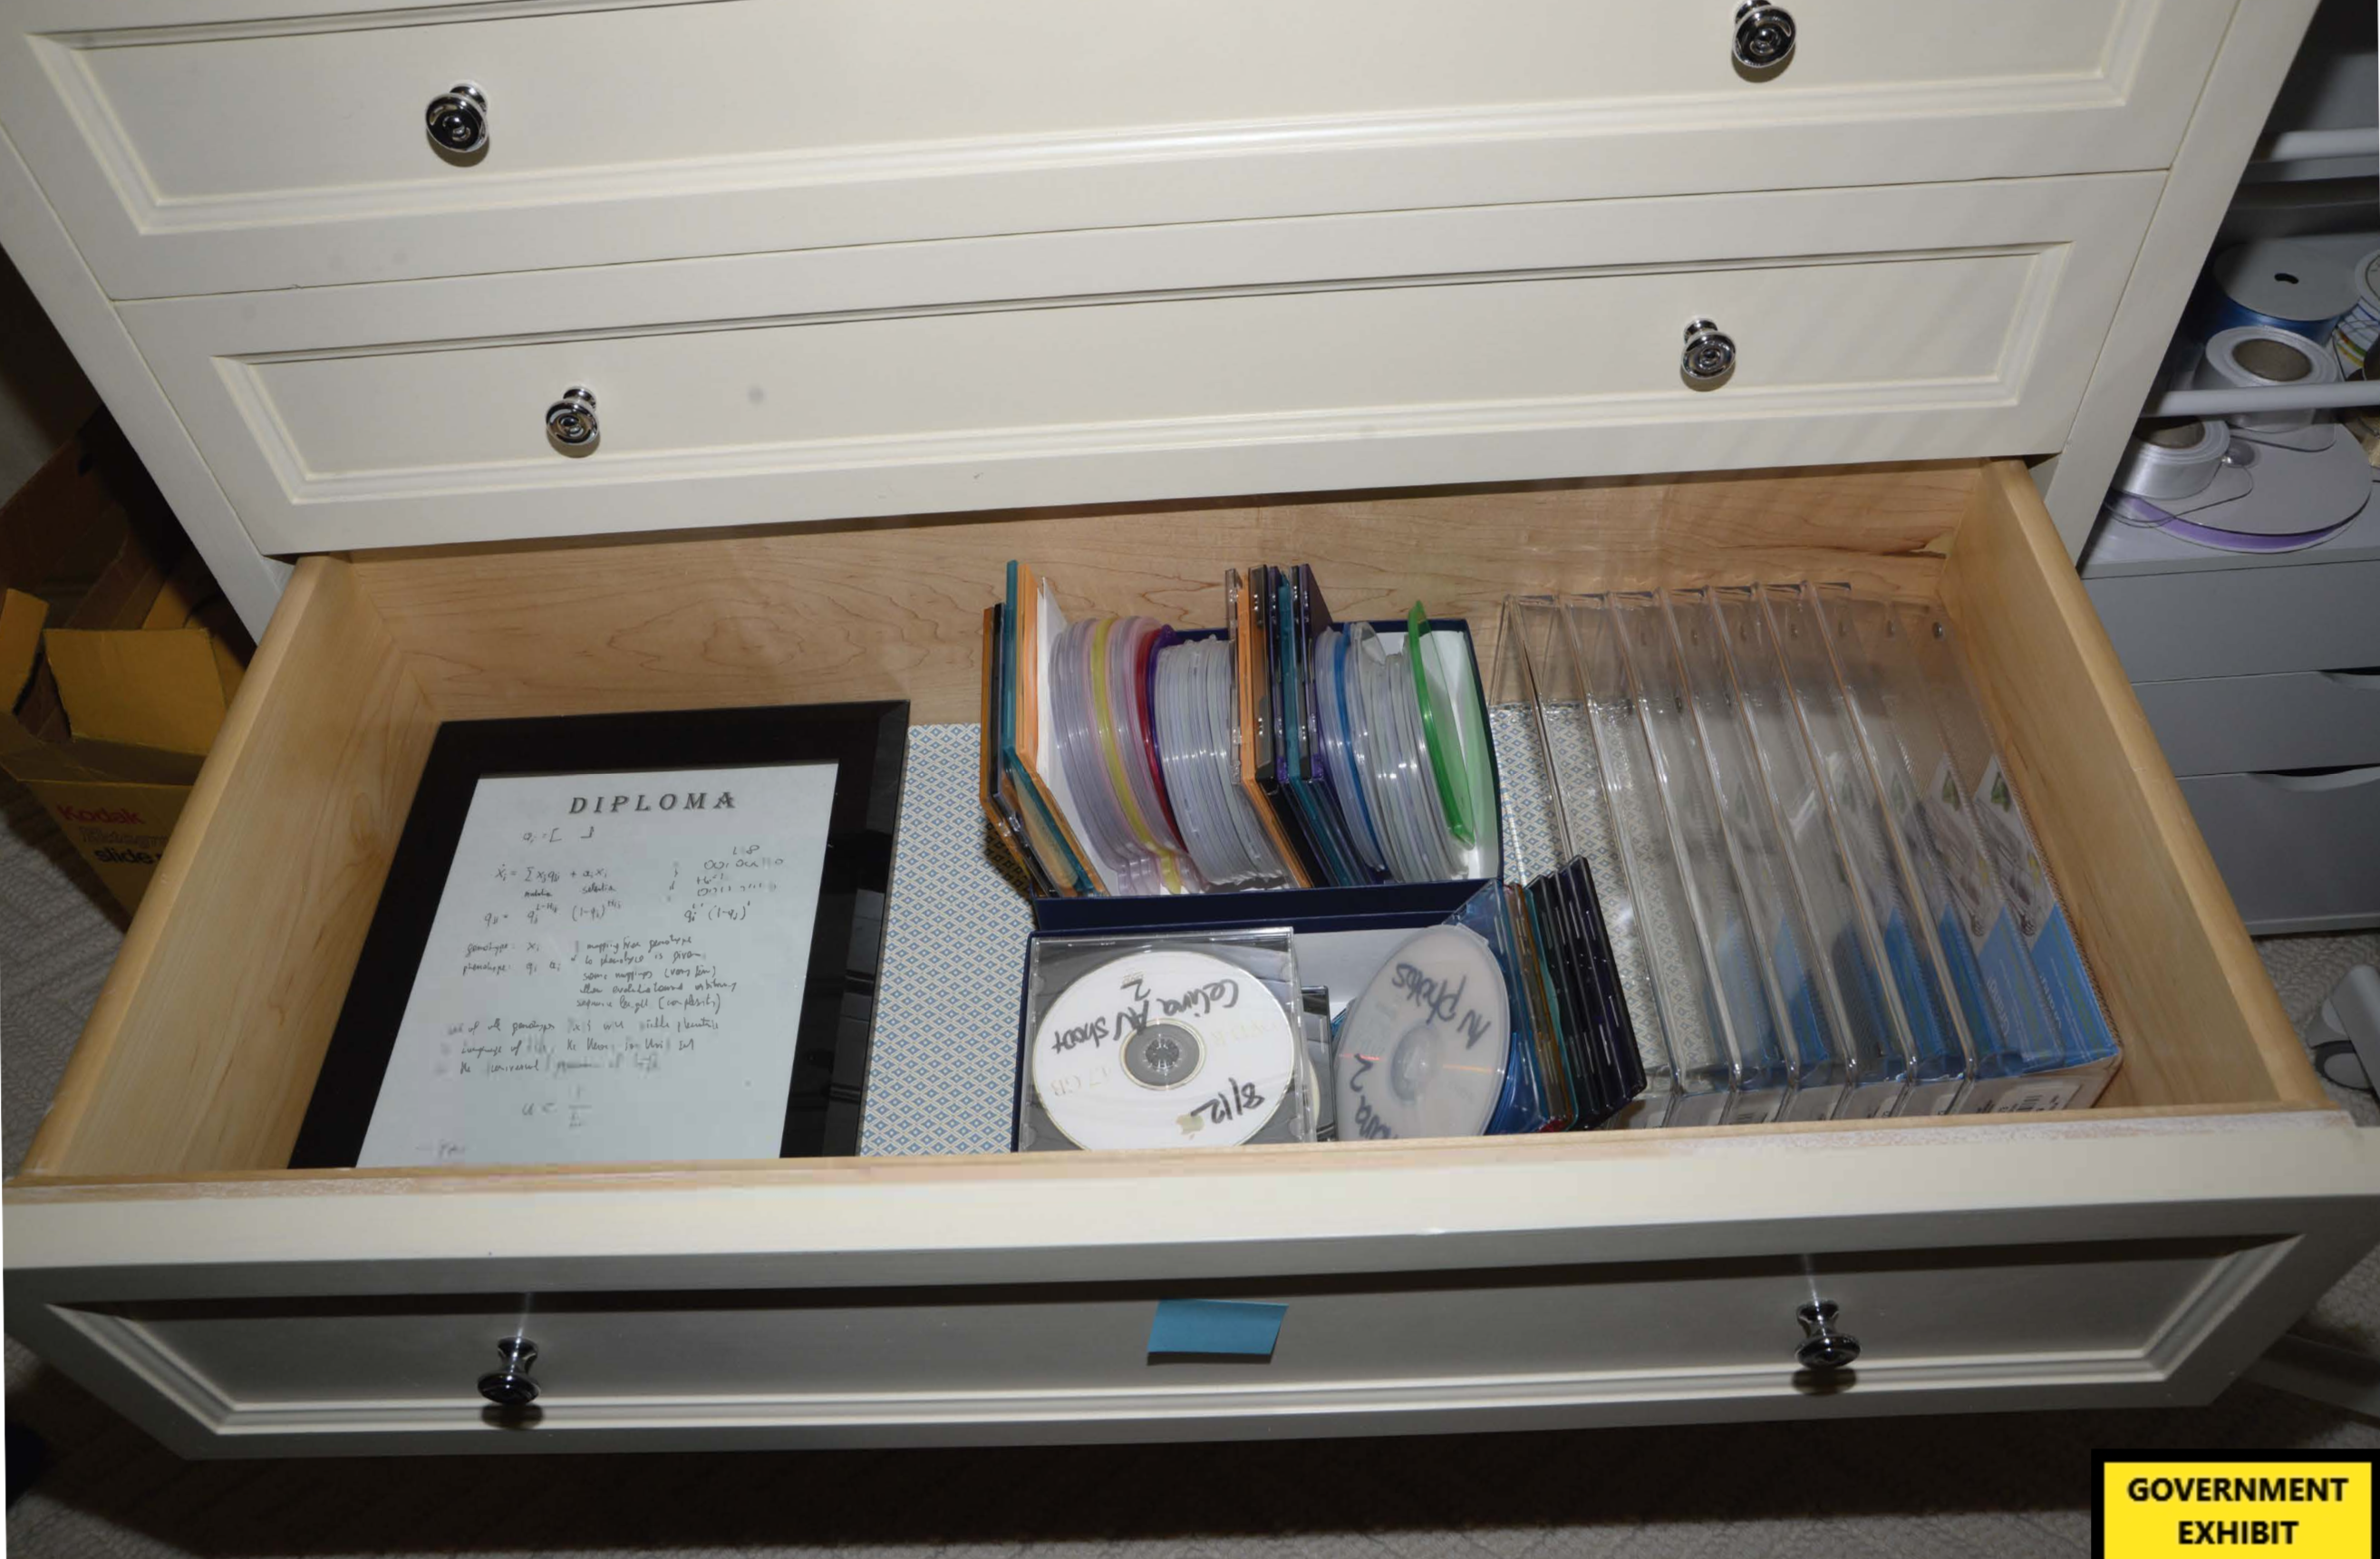 More hard drives and CDs found inside a shelf in a bedroom in Epstein’s home